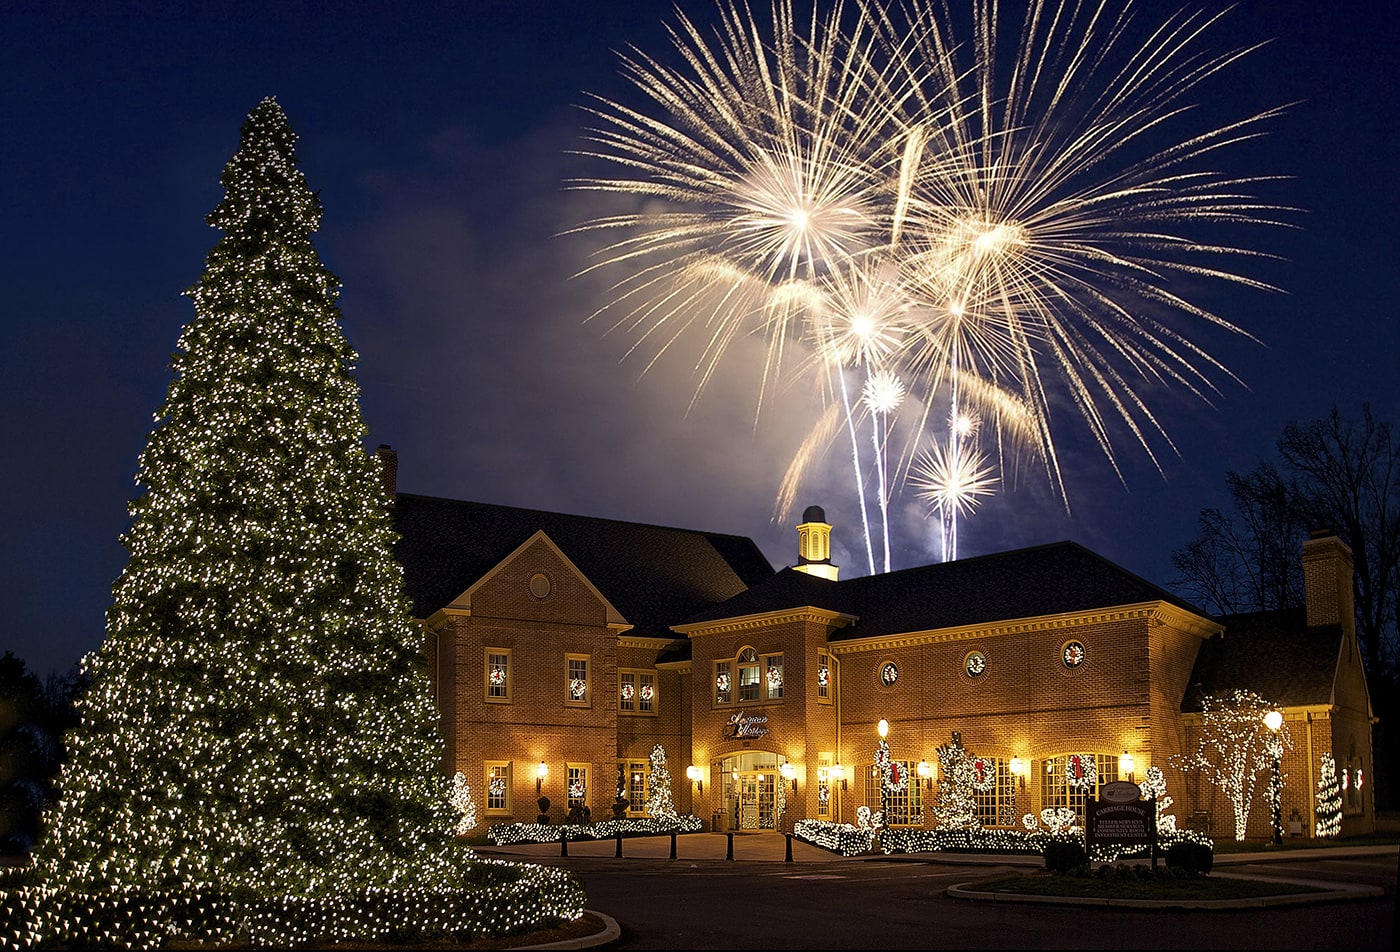 American Heritage Federal Credit Union building at night with fireworks and tree with lights